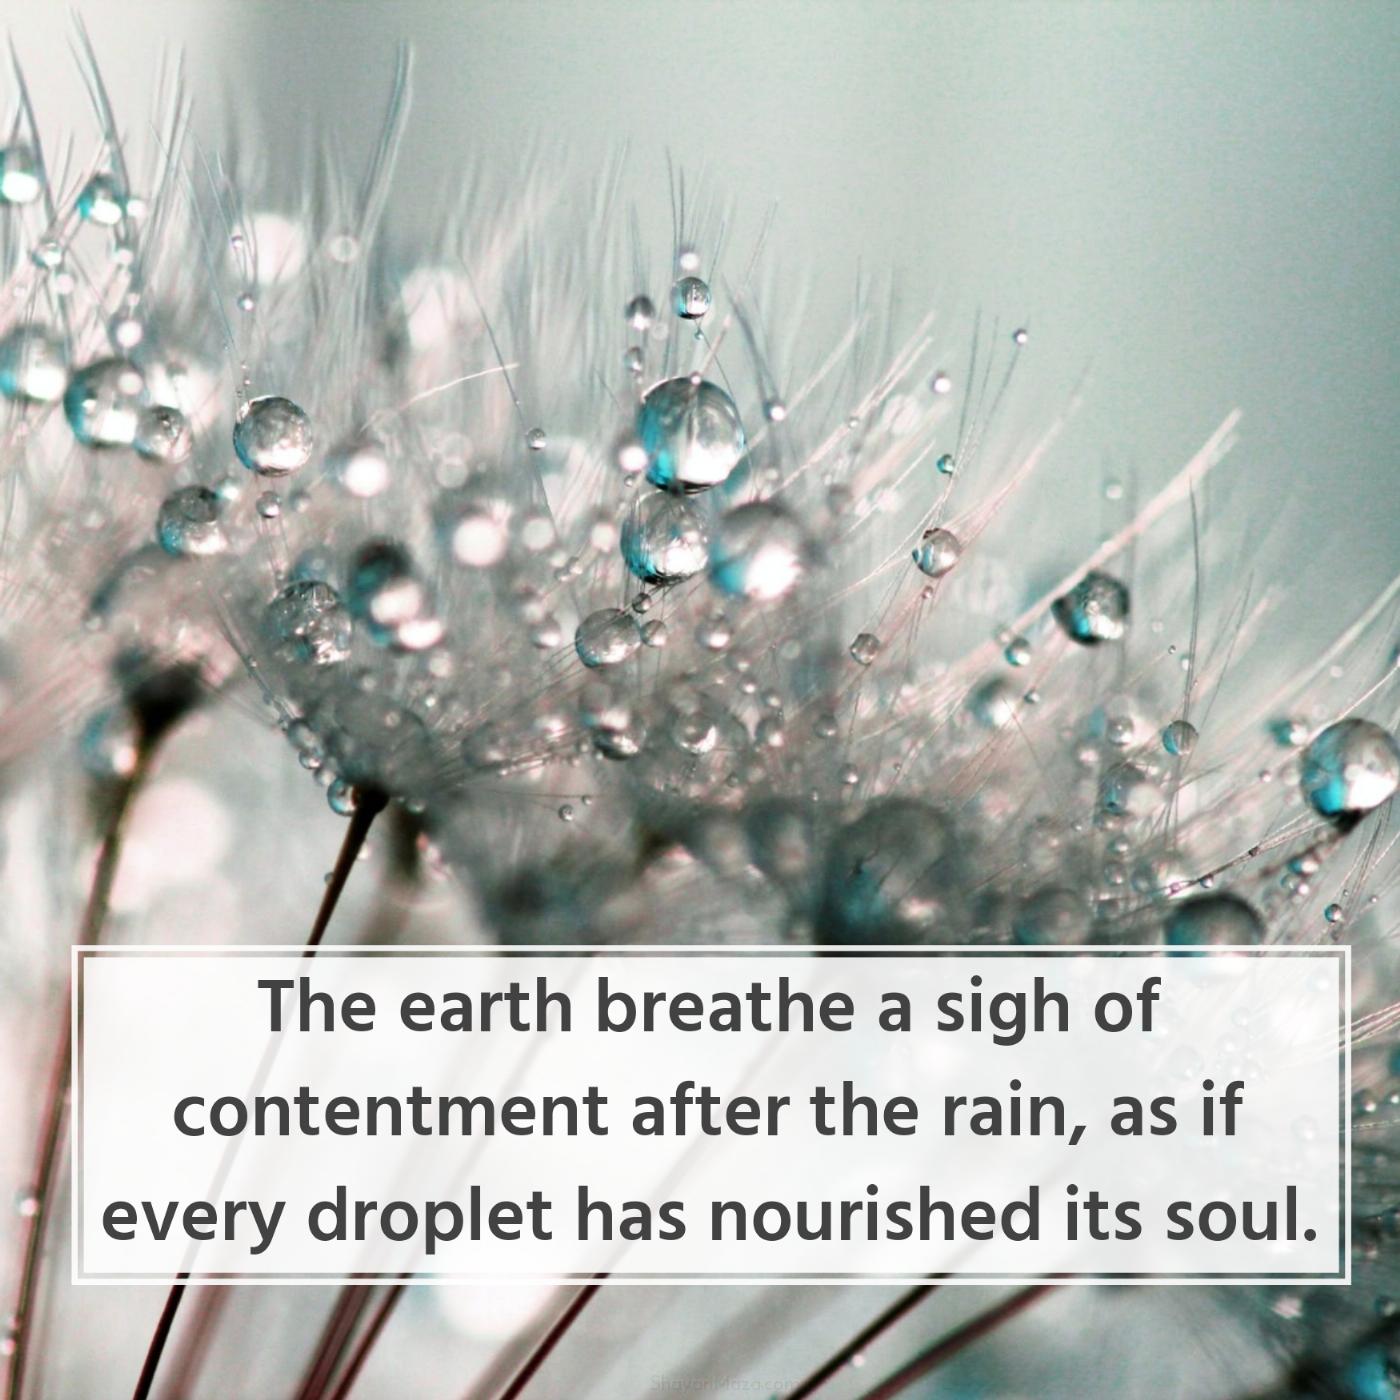 The earth breathe a sigh of contentment after the rain